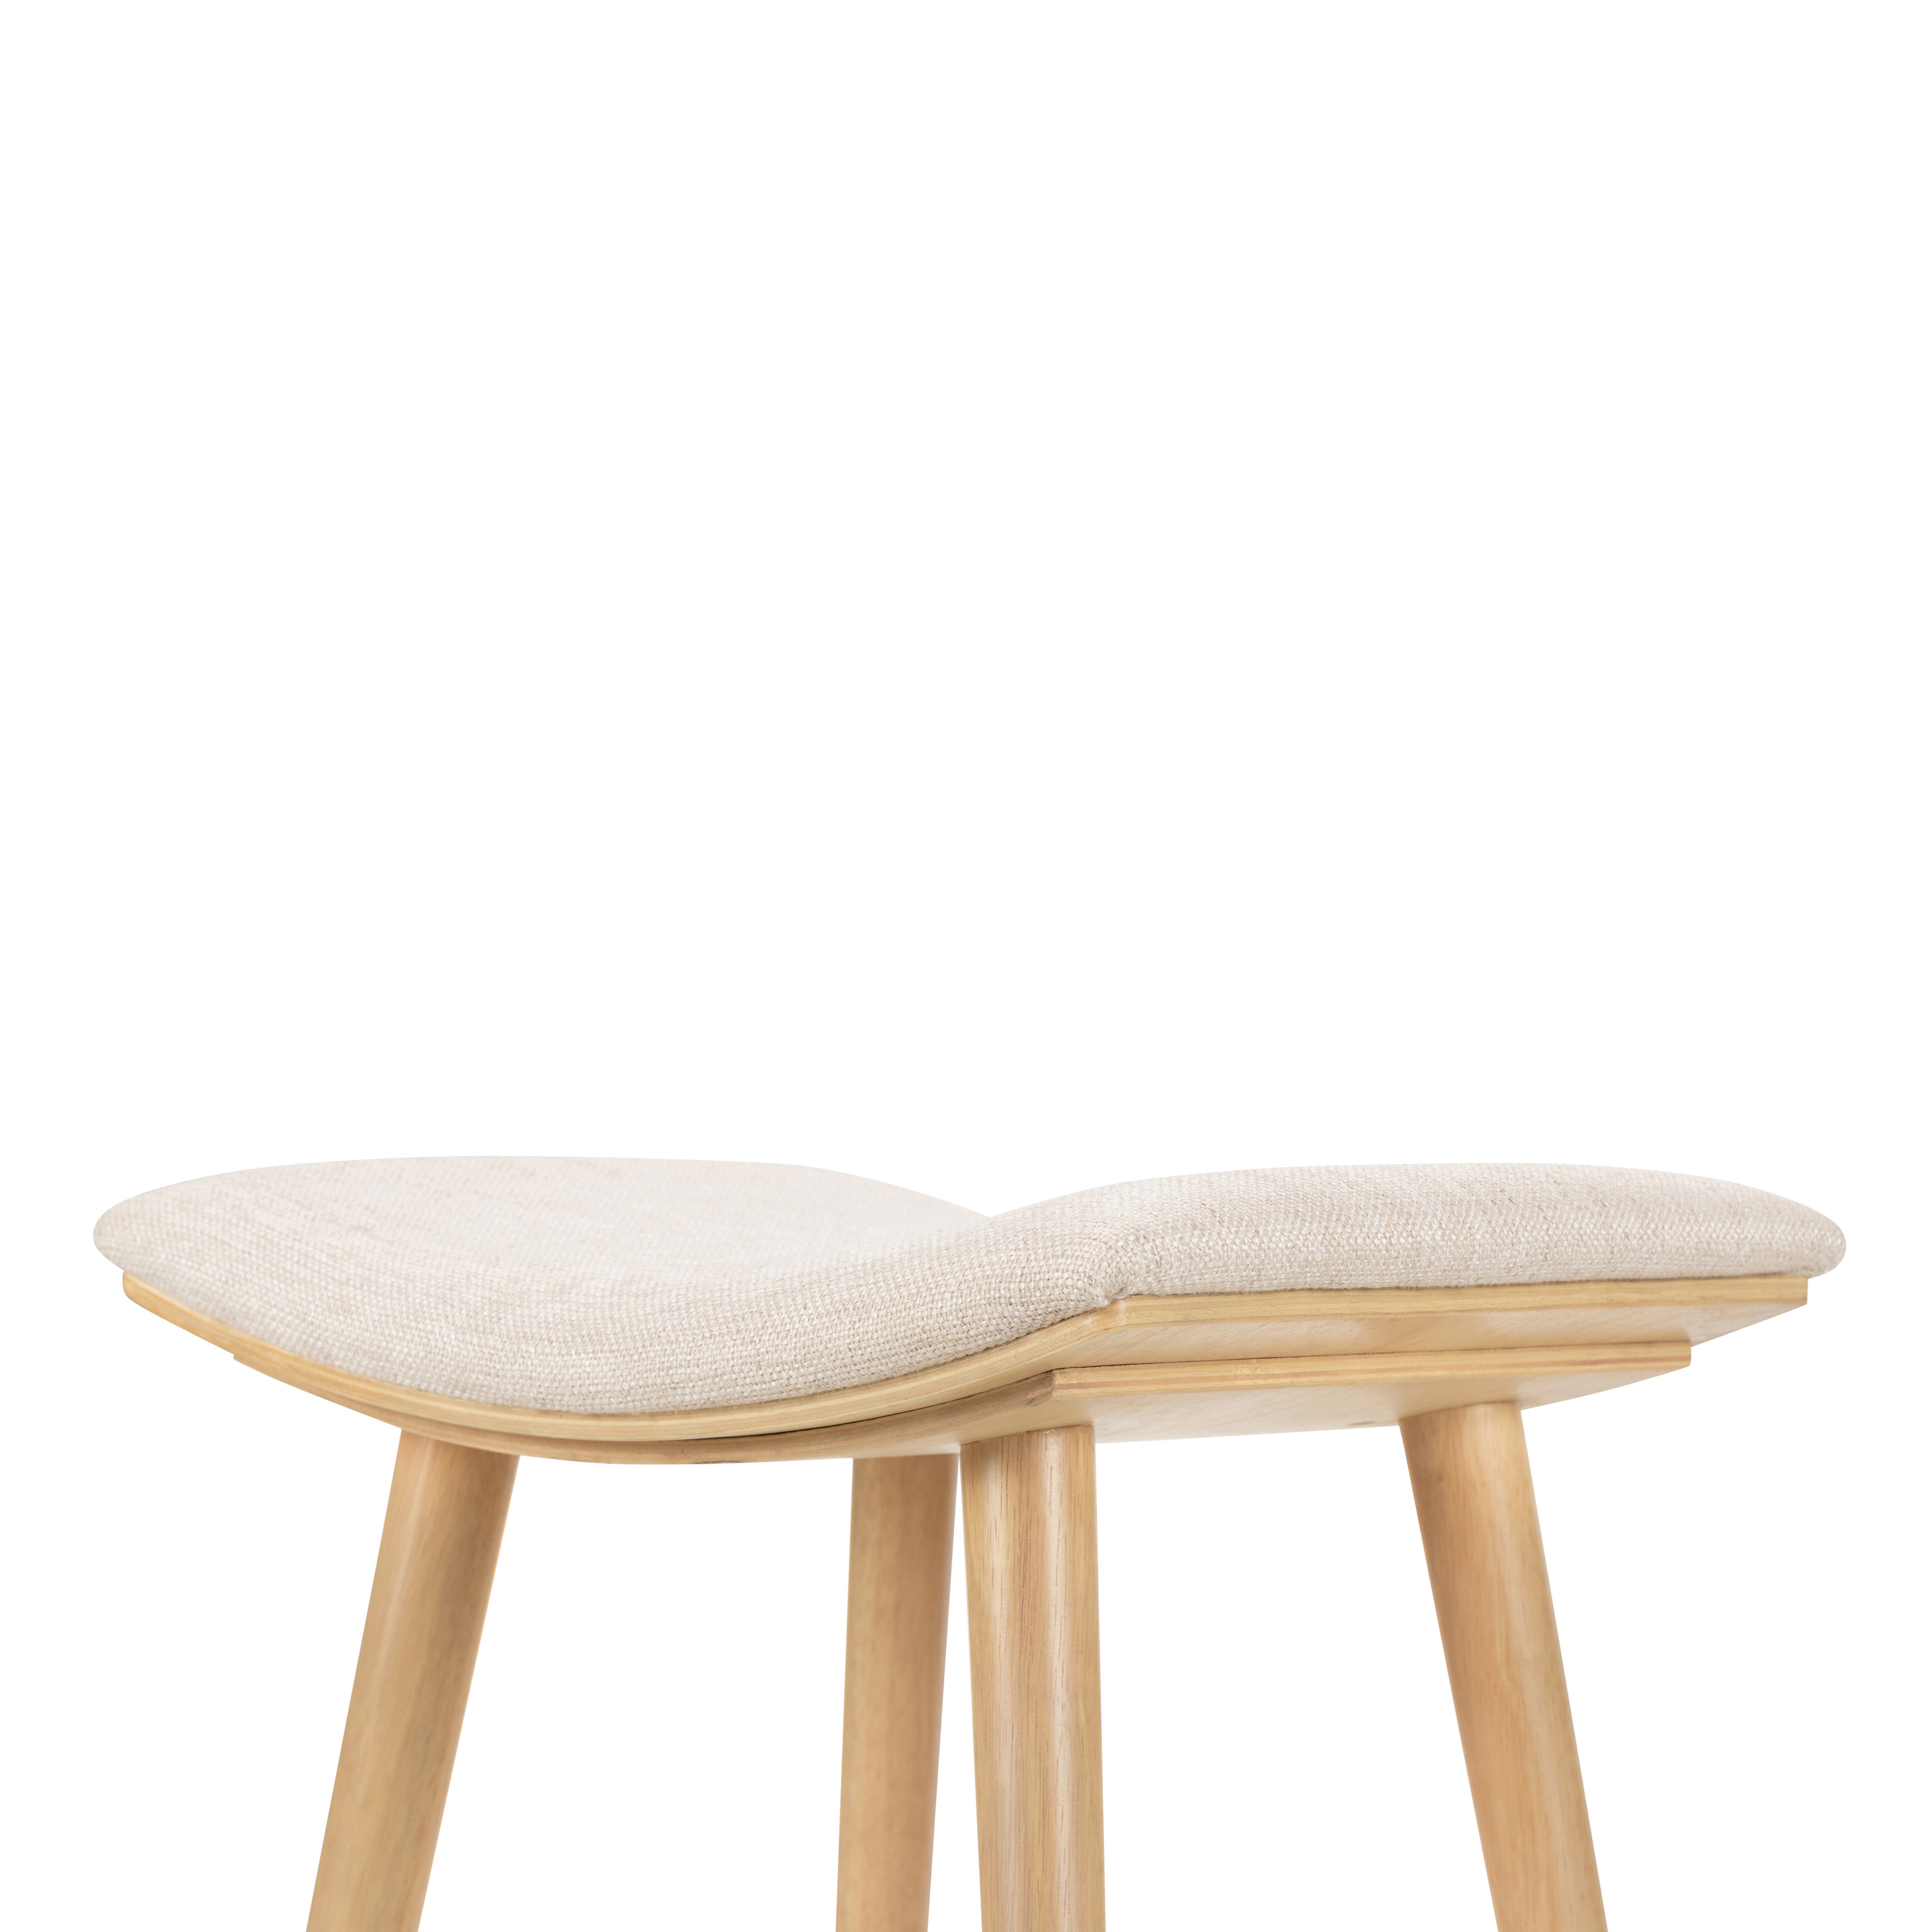 Essence Natural Fabric with Light Natural Parawood (Counter Height) | Union Bar/Counter Stool | Valley Ridge Furniture